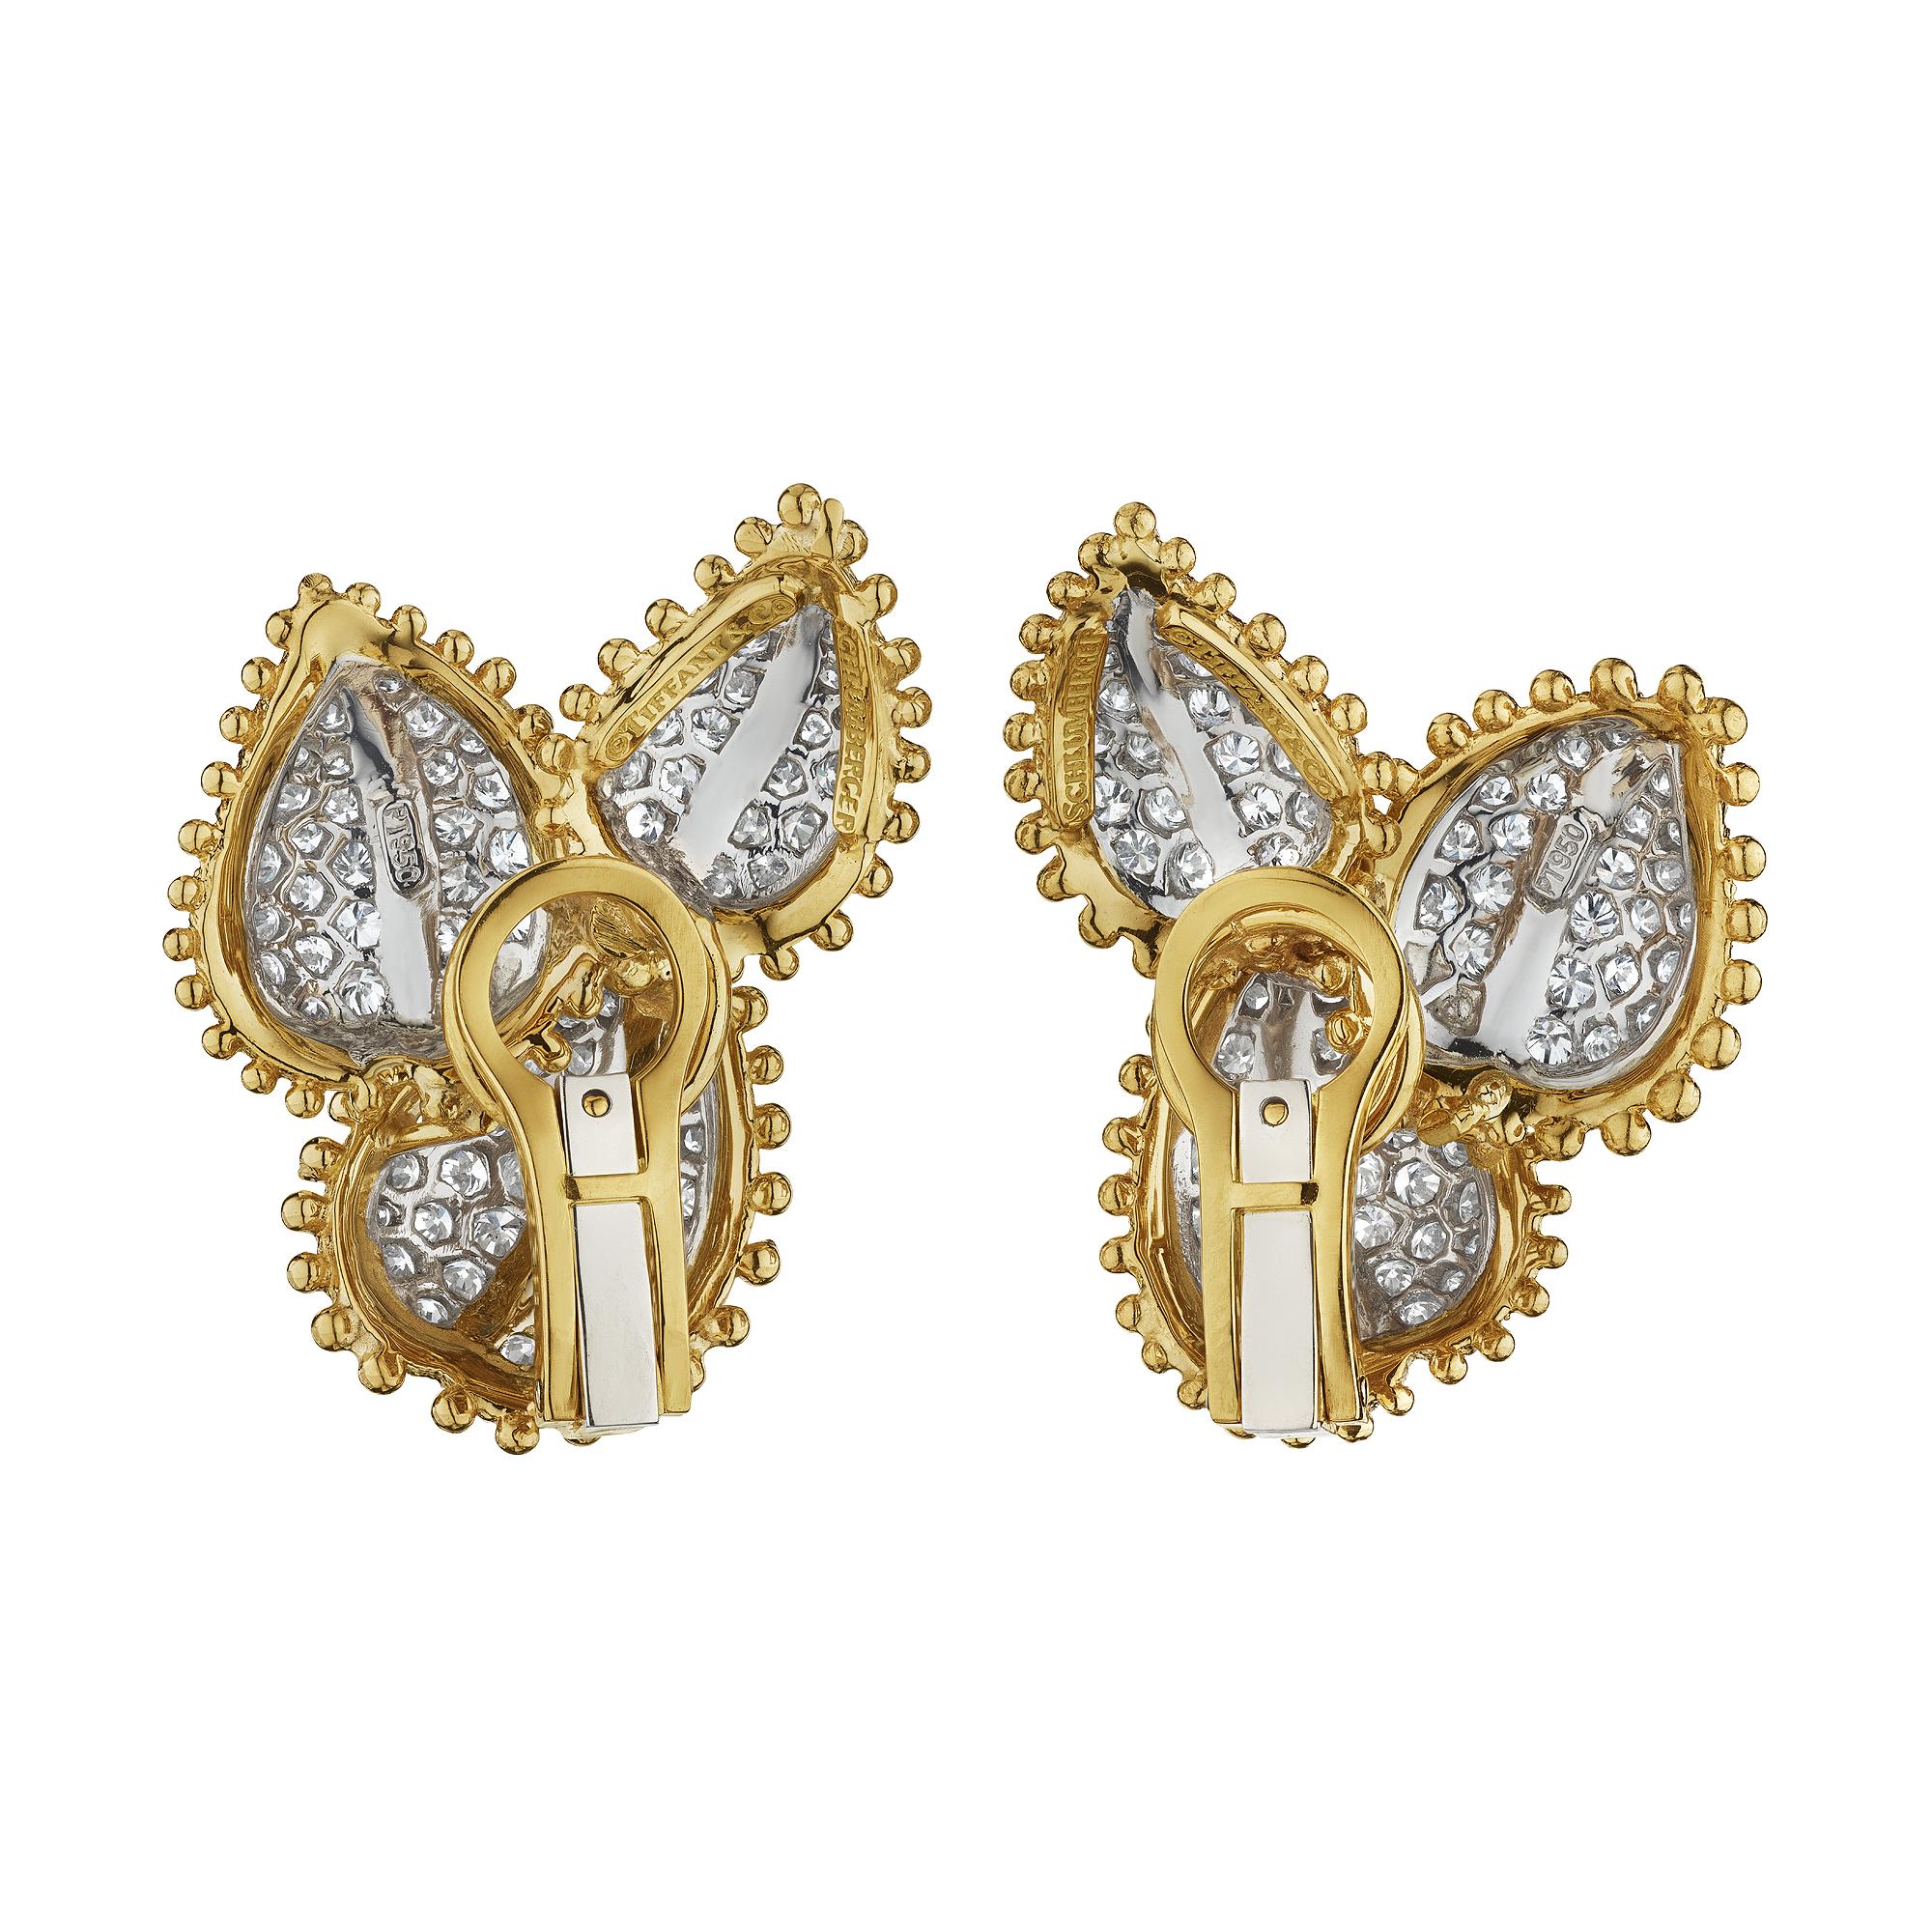 Turn over a new leaf with these Tiffany & Co. Schlumberger modernist diamond platinum and 18 karat yellow gold clip earrings.  With six undulating and overlapping diamond leaves, these luminous earrings have the fire and flair you have been looking